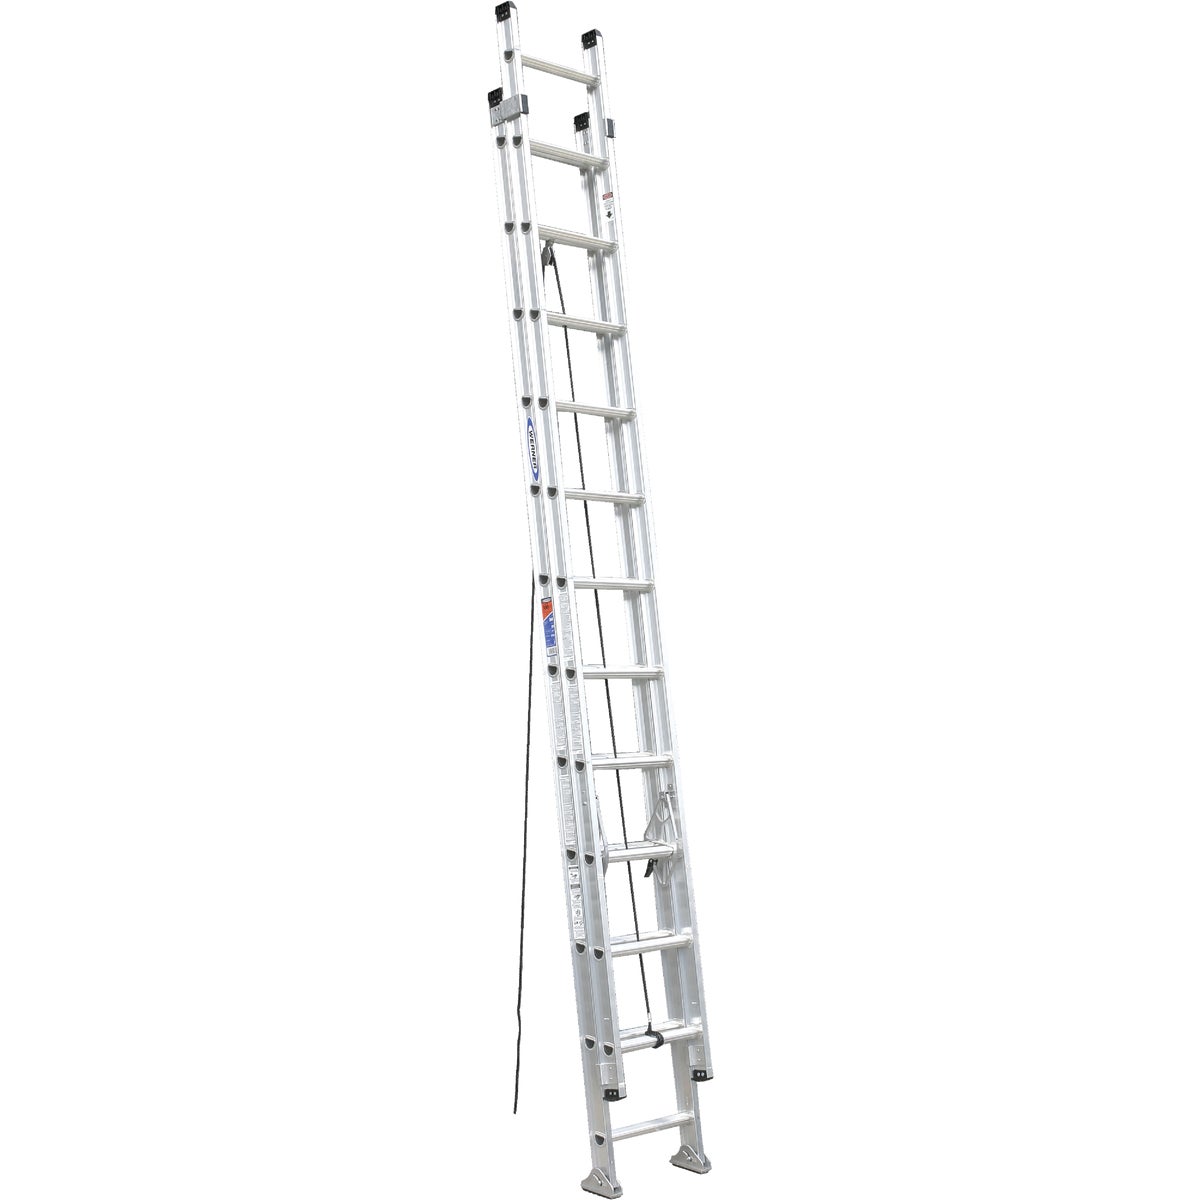 Werner 24 Ft. Aluminum Extension Ladder with 300 Lb. Load Capacity Type IA Duty Rating